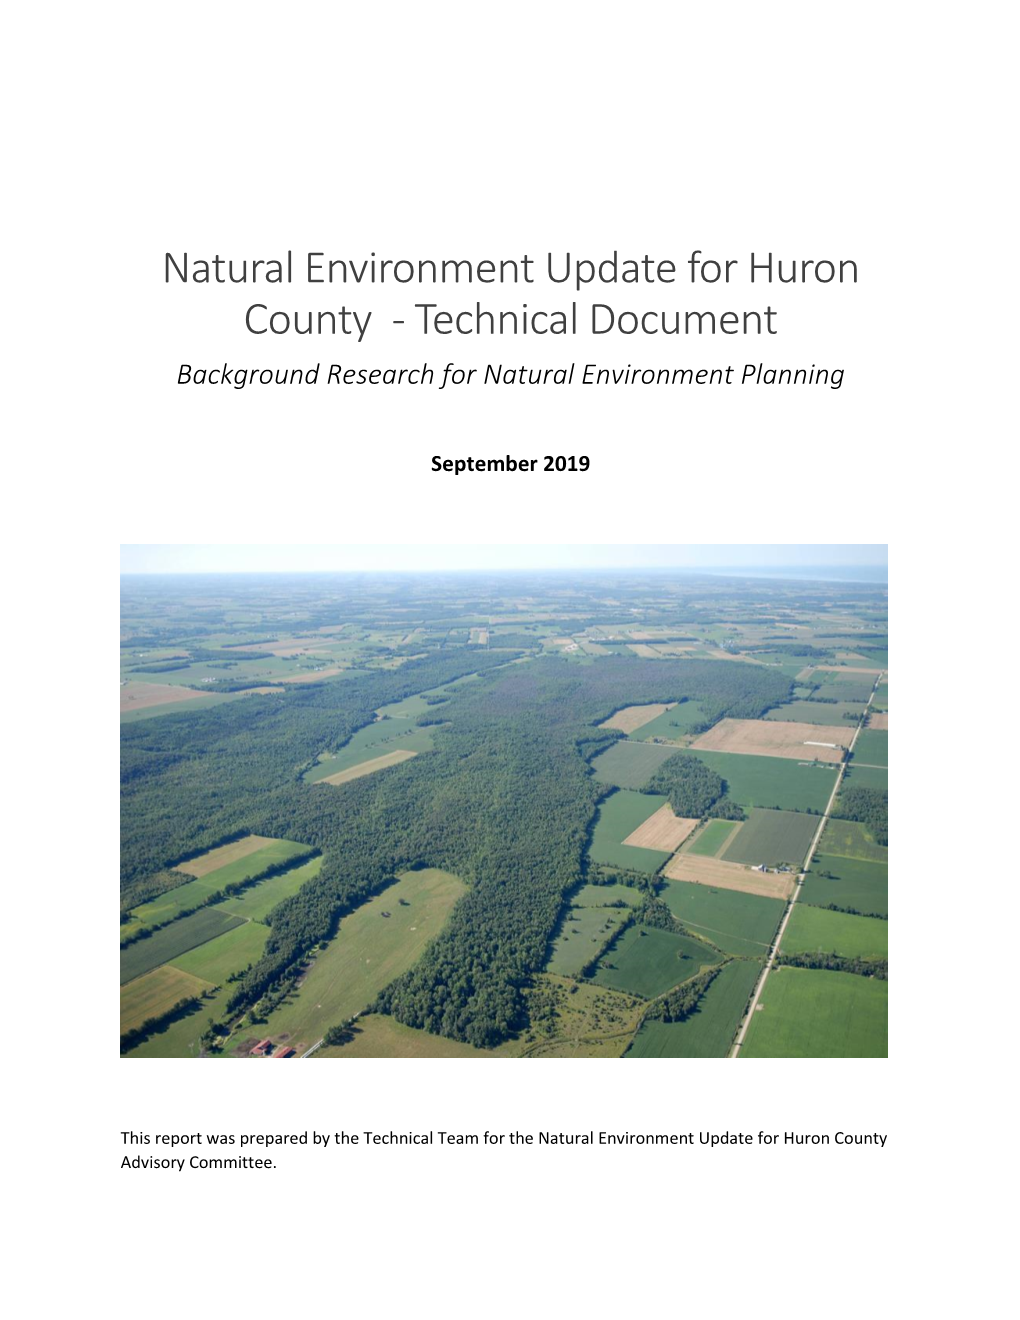 Natural Environment Update for Huron County - Technical Document